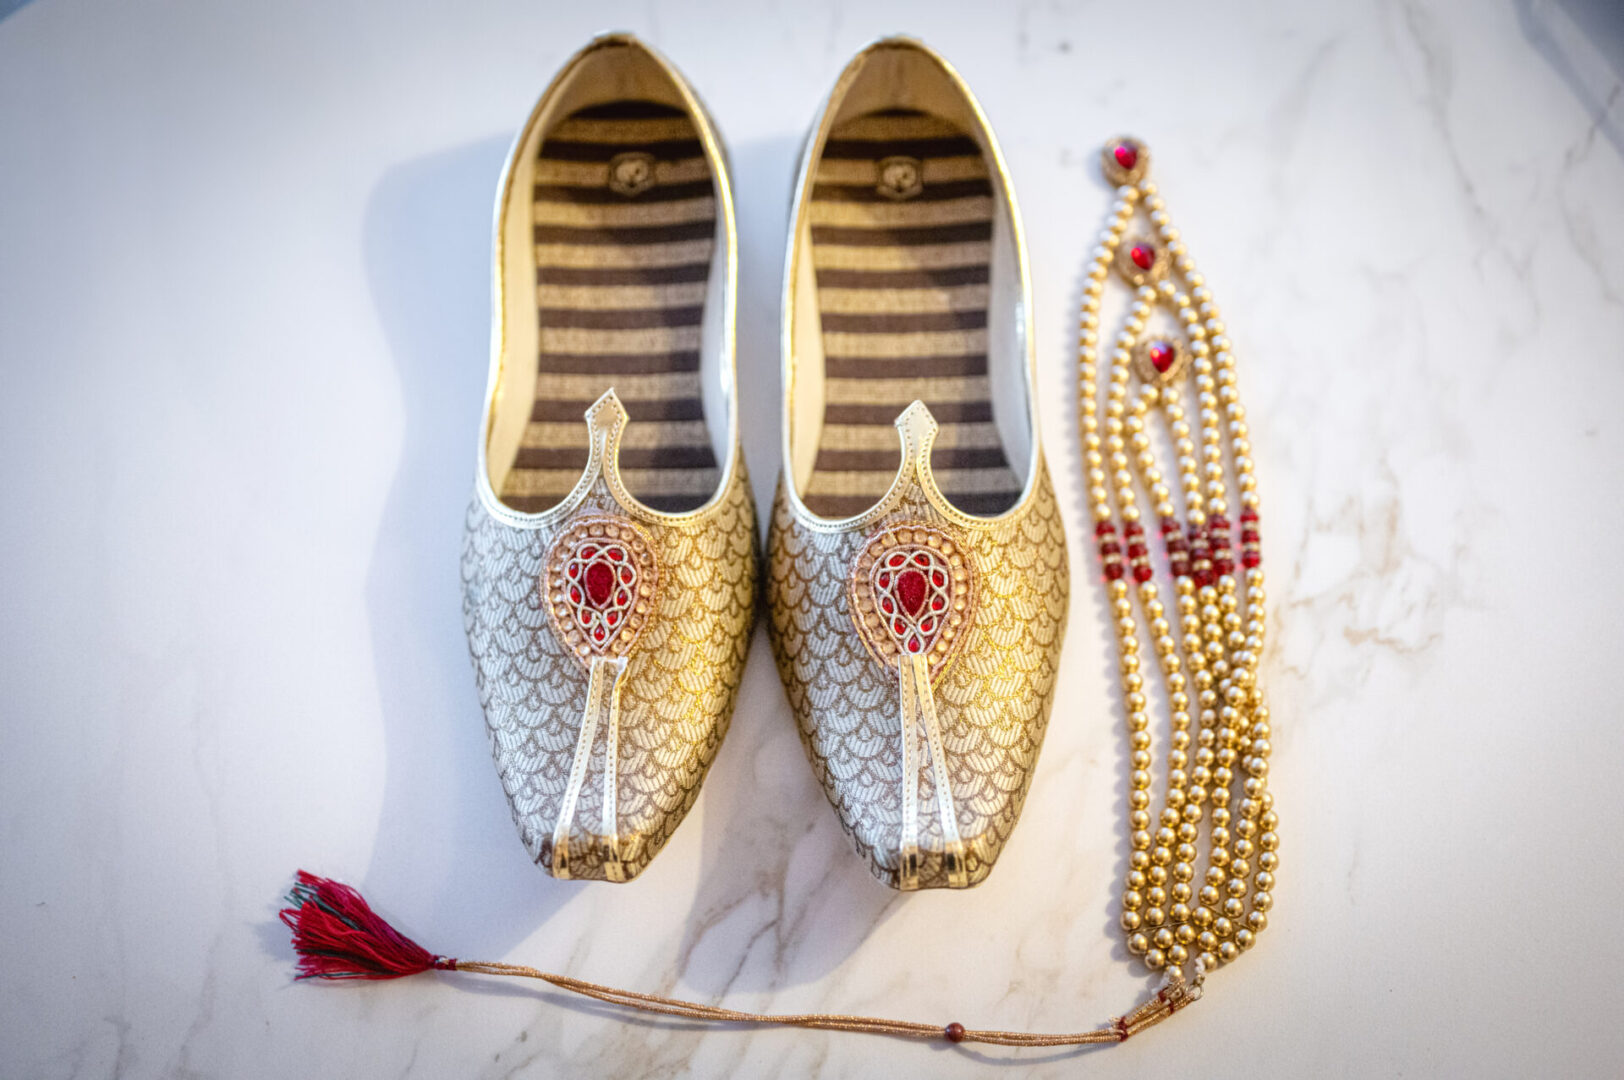 Traditional Indian shoes